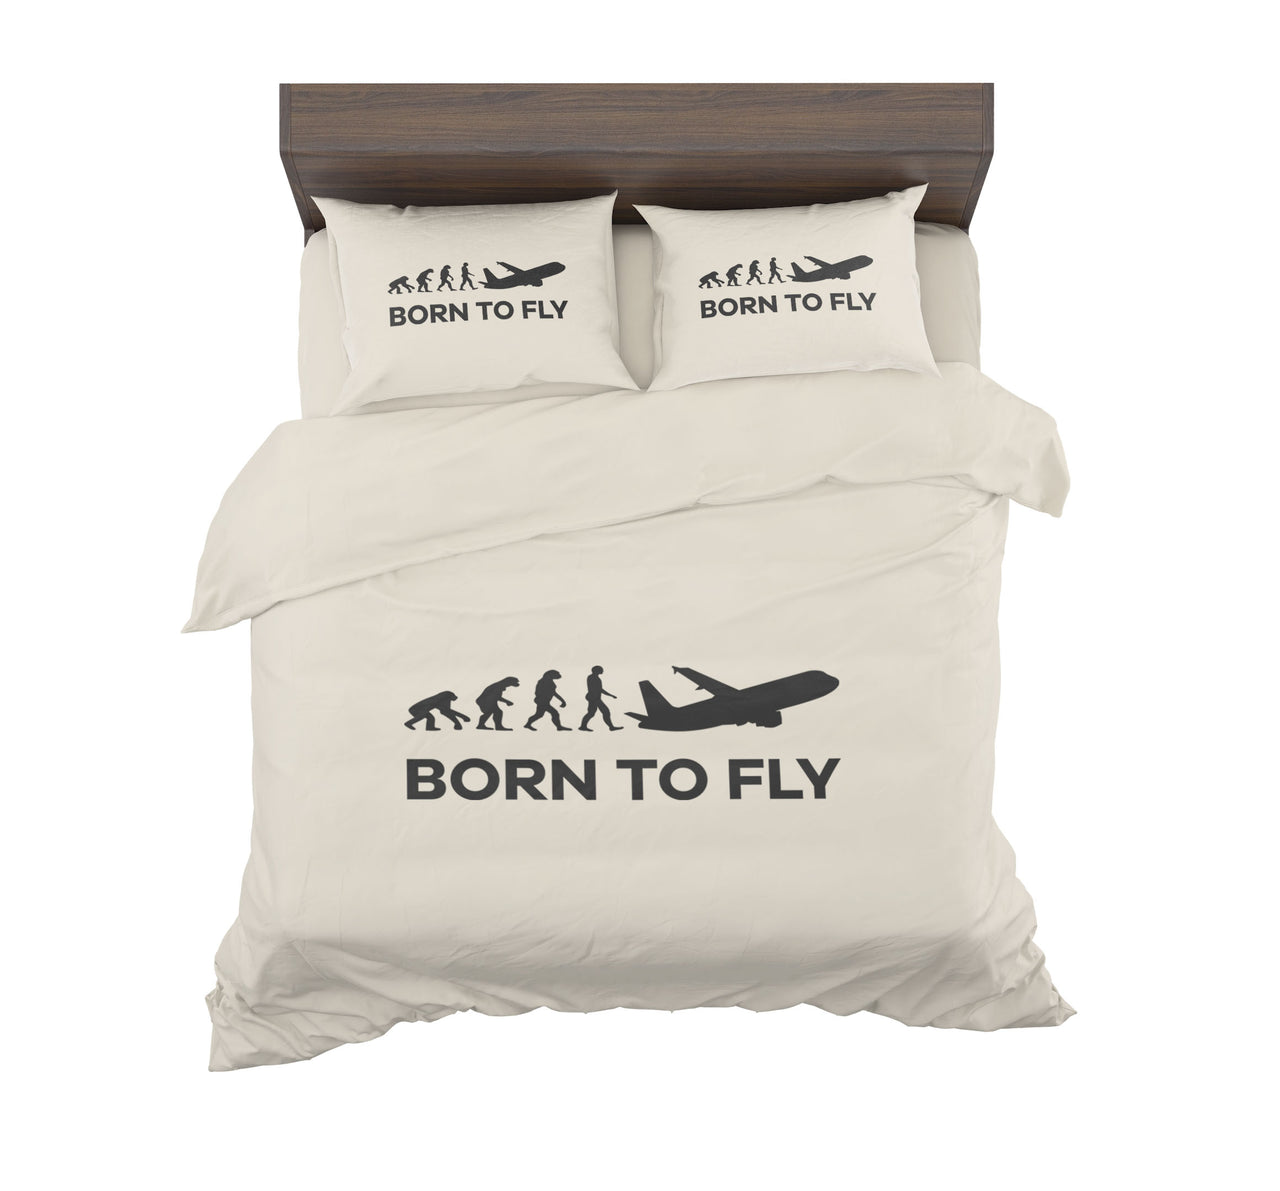 Born To Fly Designed Bedding Sets